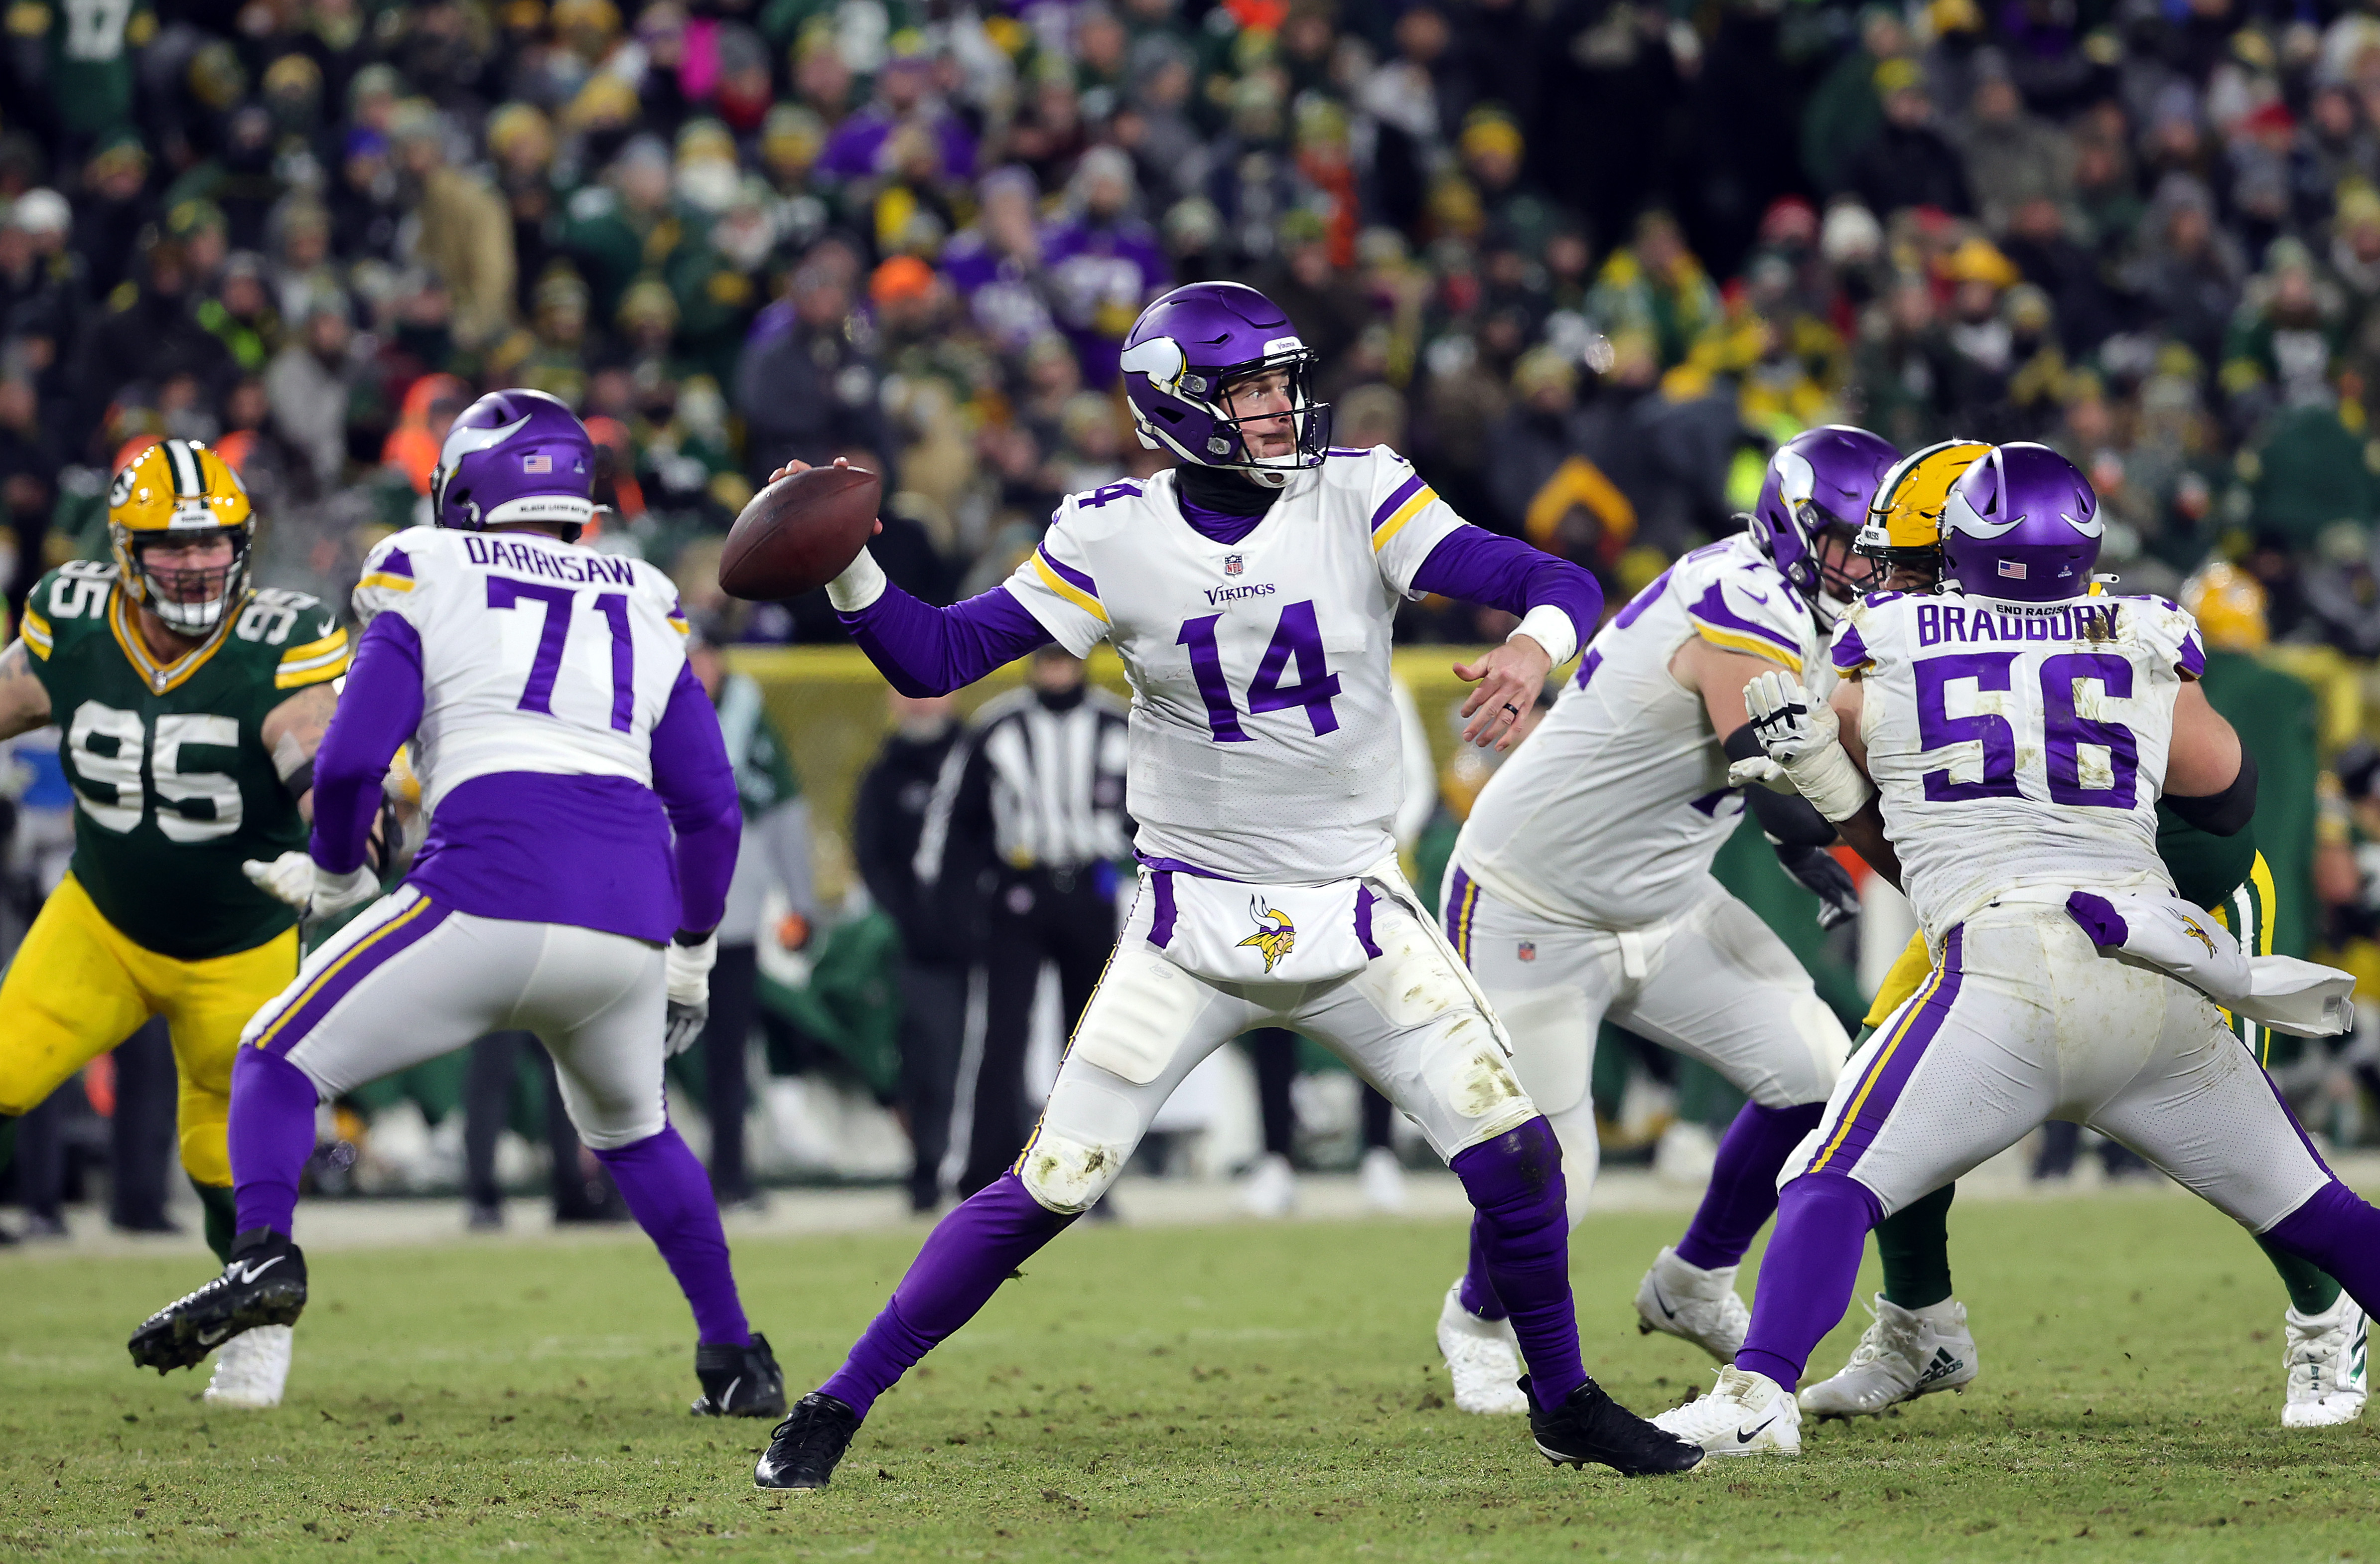 Minnesota Vikings' Sean Mannion has 'gut-wrenching' third career NFL start  with 37-10 loss to Green Bay Packers 